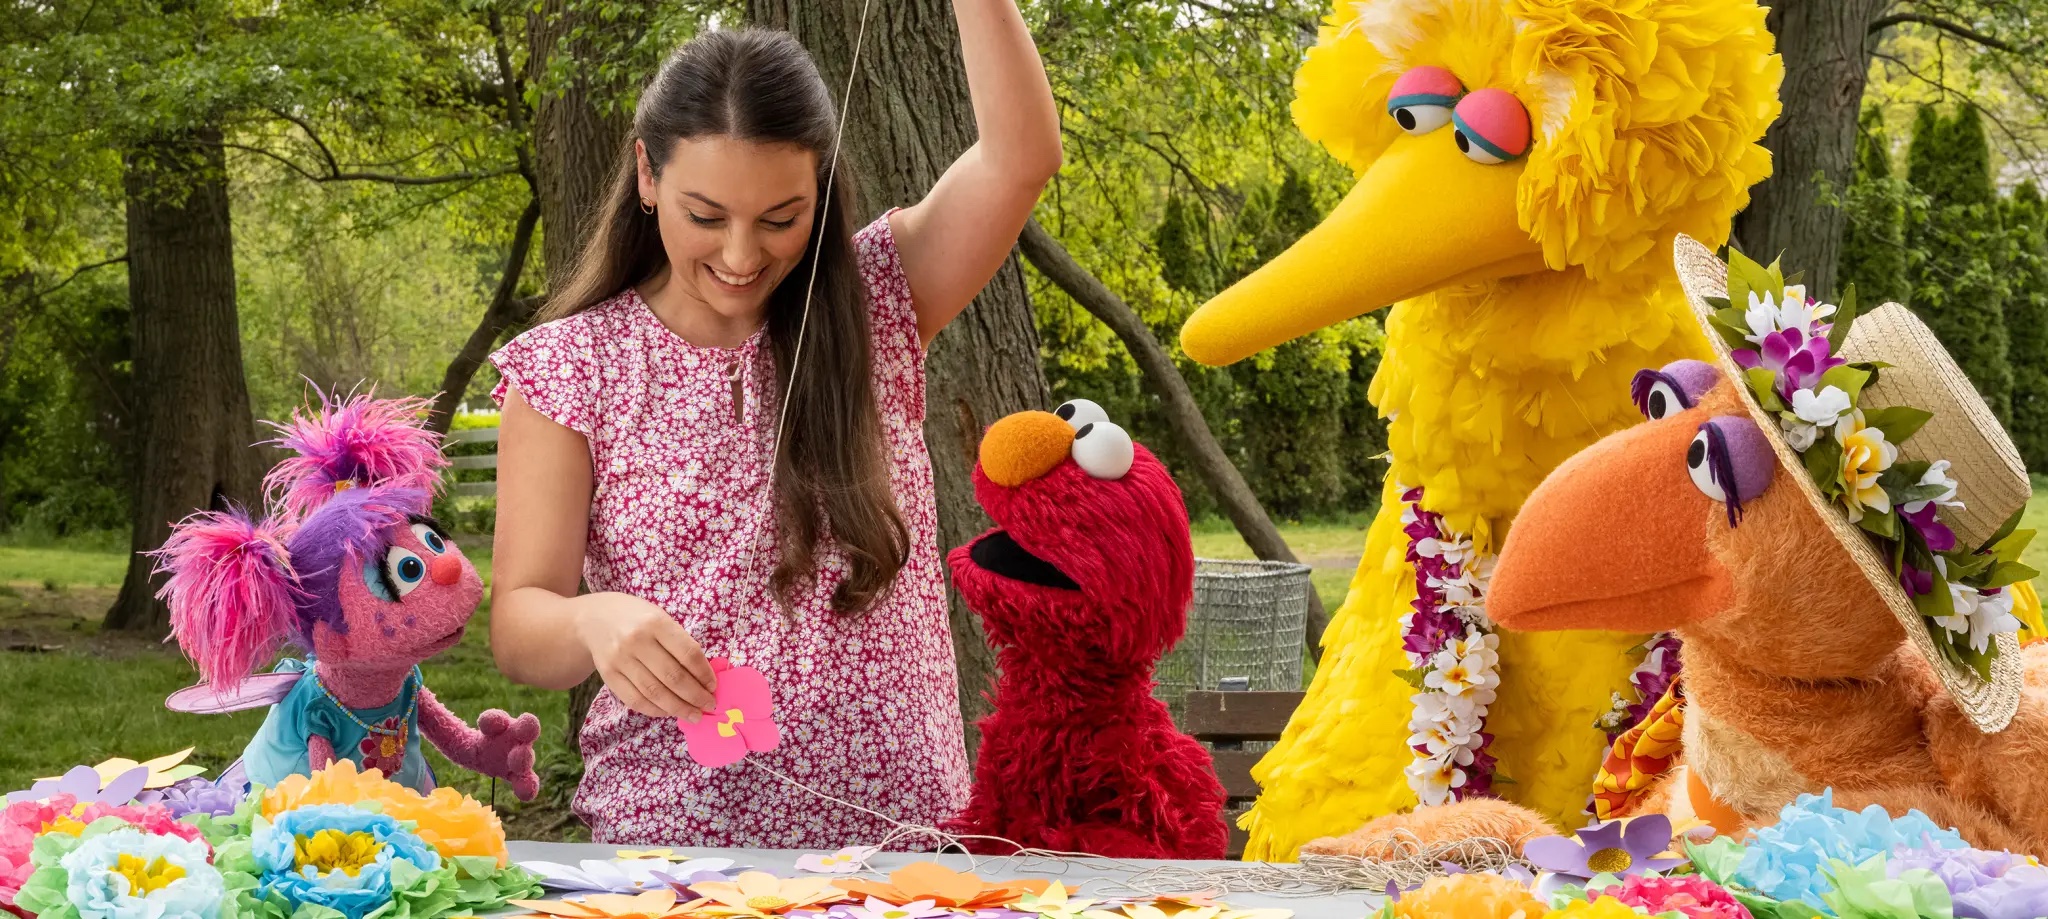 A woman makes paper flowers with Abby, Elmo, and Big Bird.